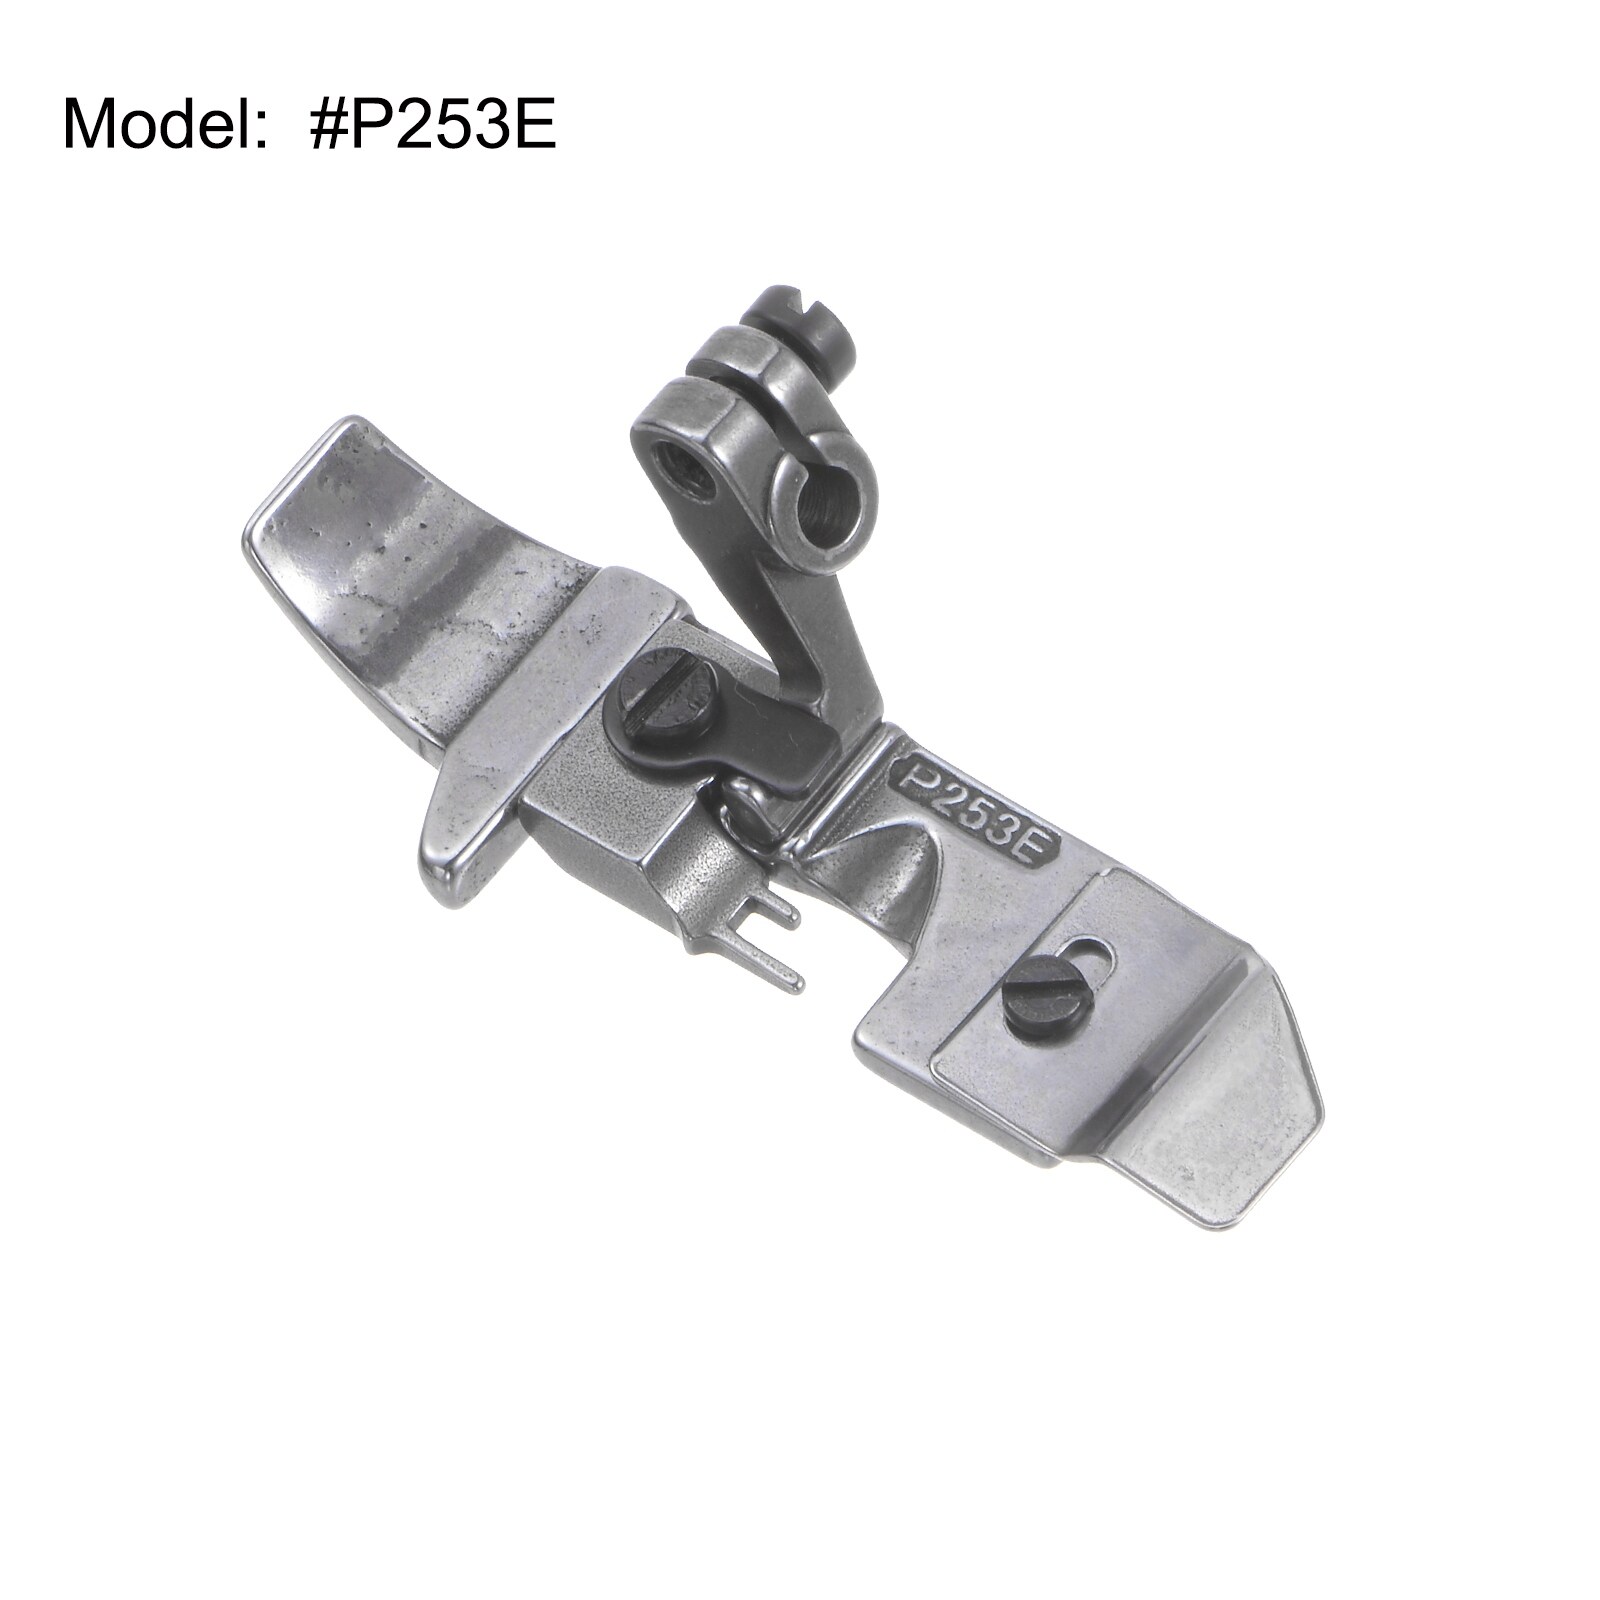 2pcs #P253E 4-Thread Dense-Edge Chrome Plated Presser Foot for Sewing Machines - Silver Gray - 2 Pieces